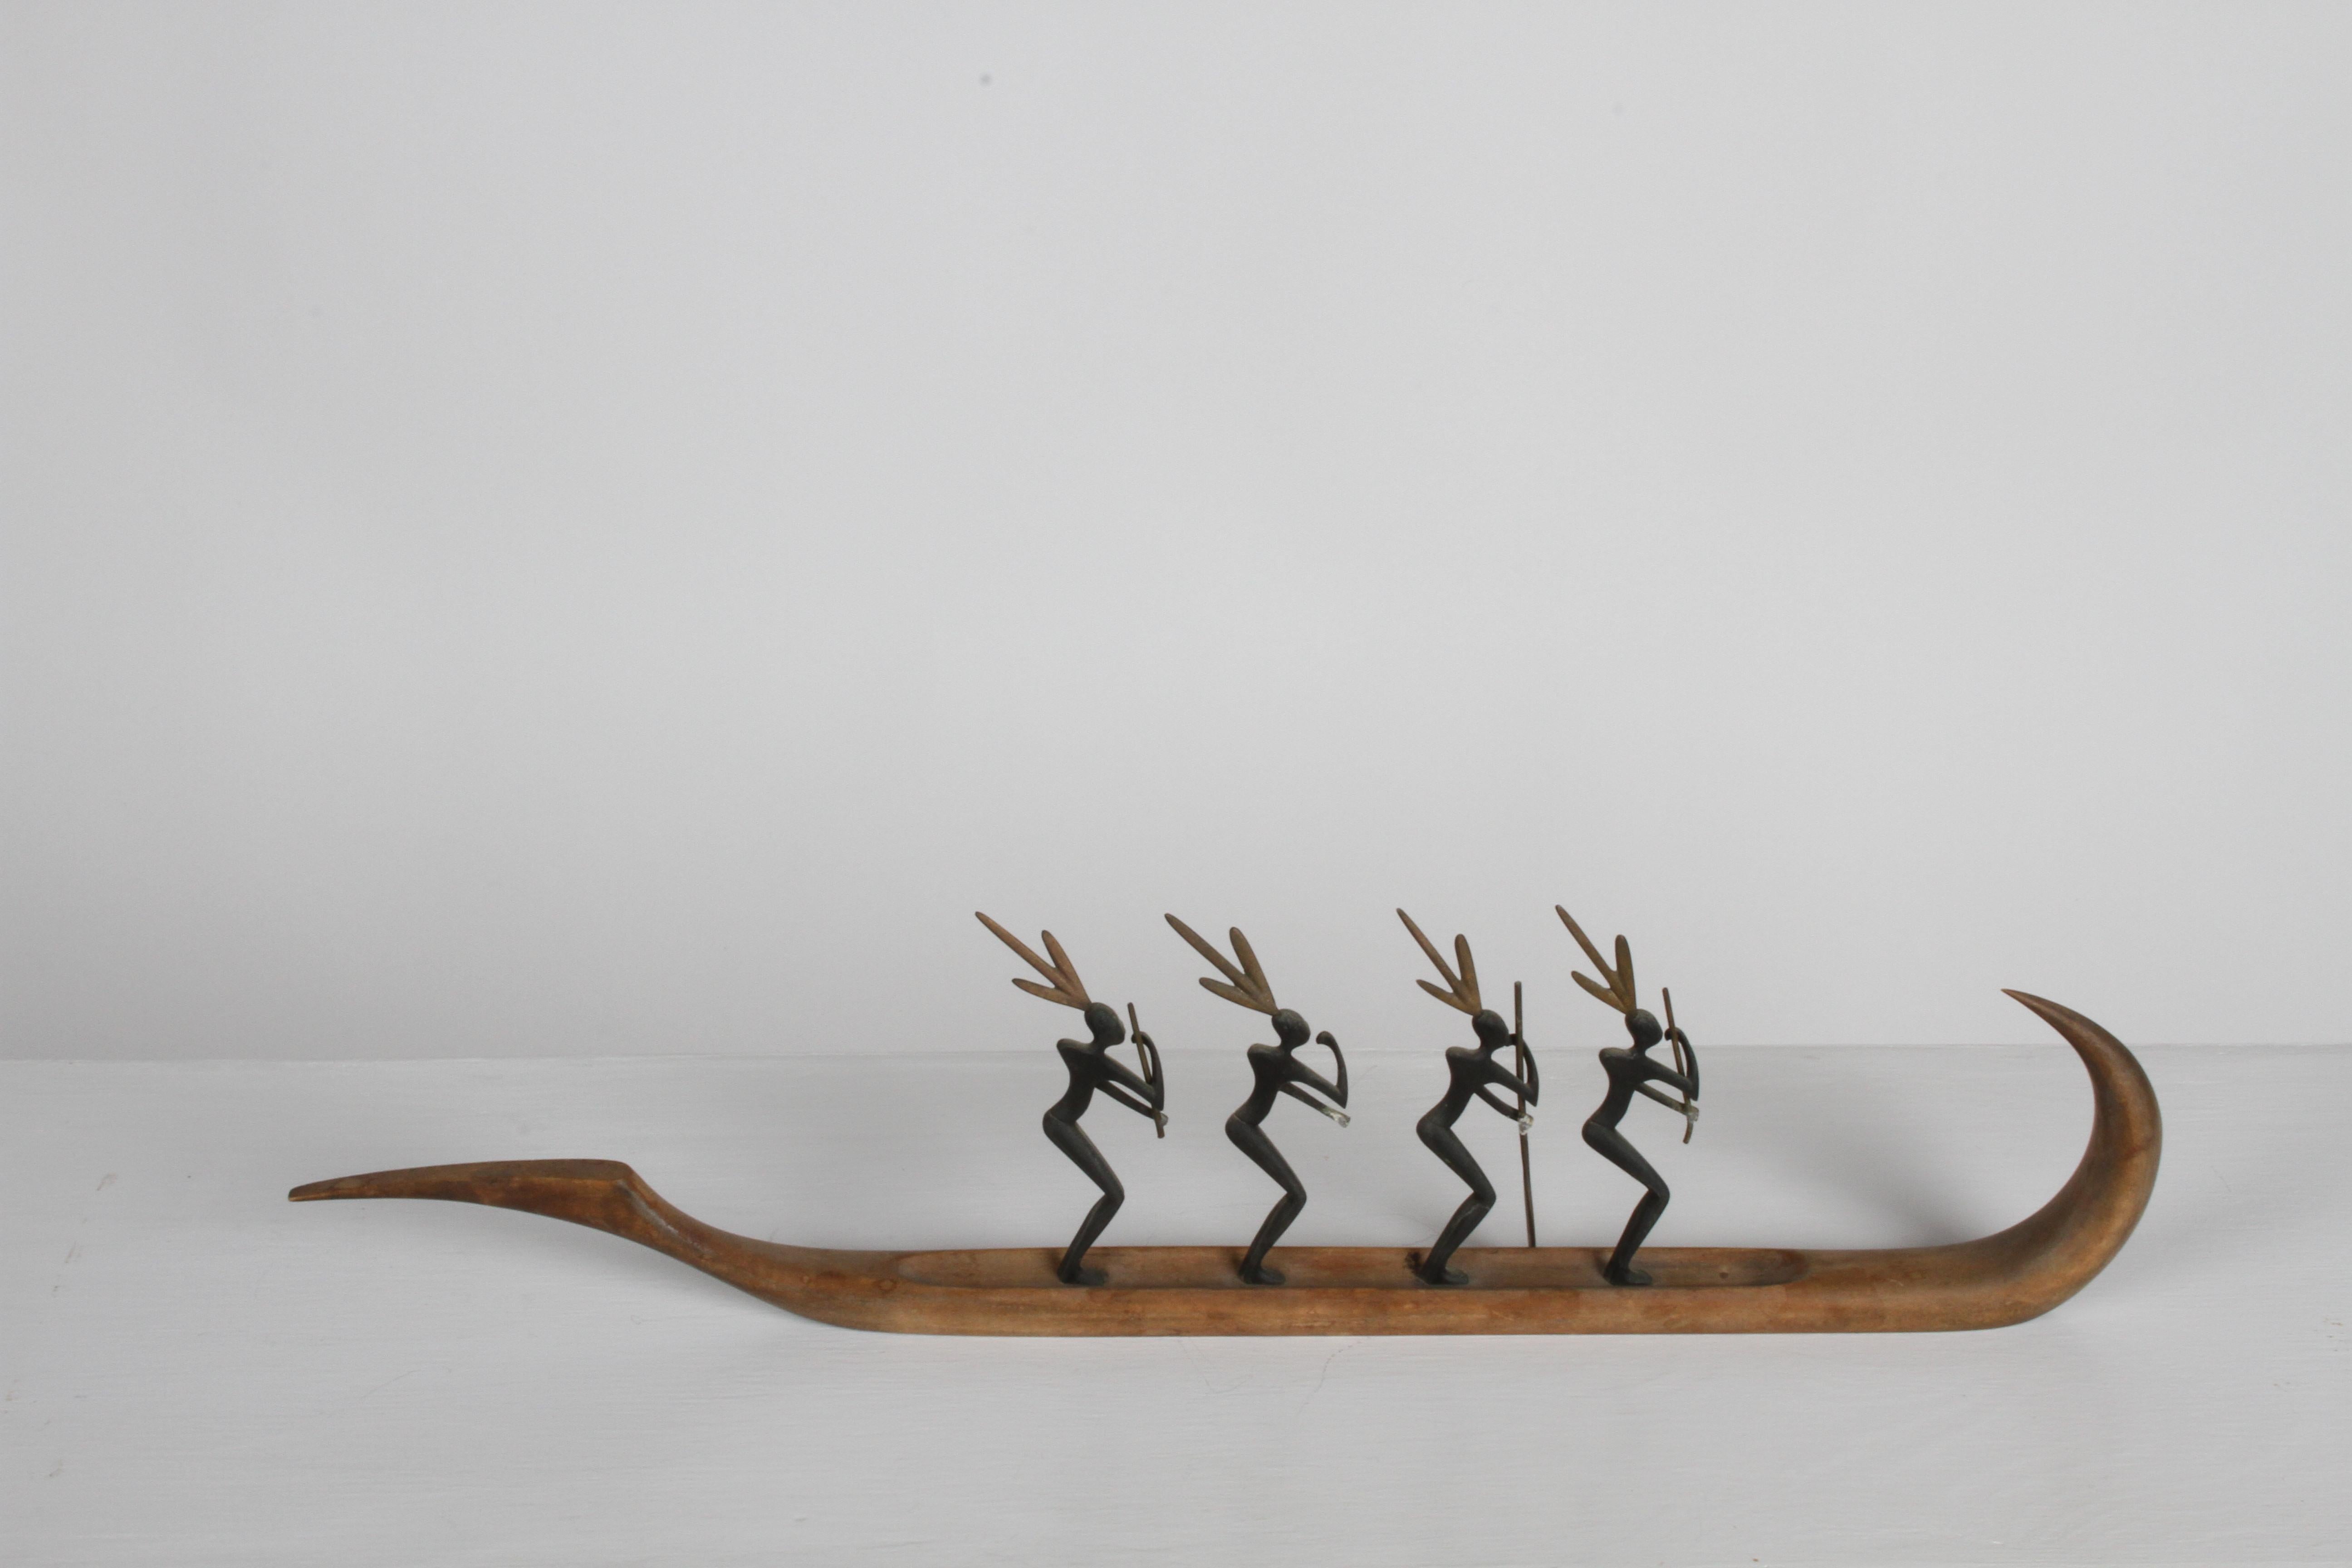 Bronze Franz Hagenauer Wooden Canoe with 4 Standing African Paddlers